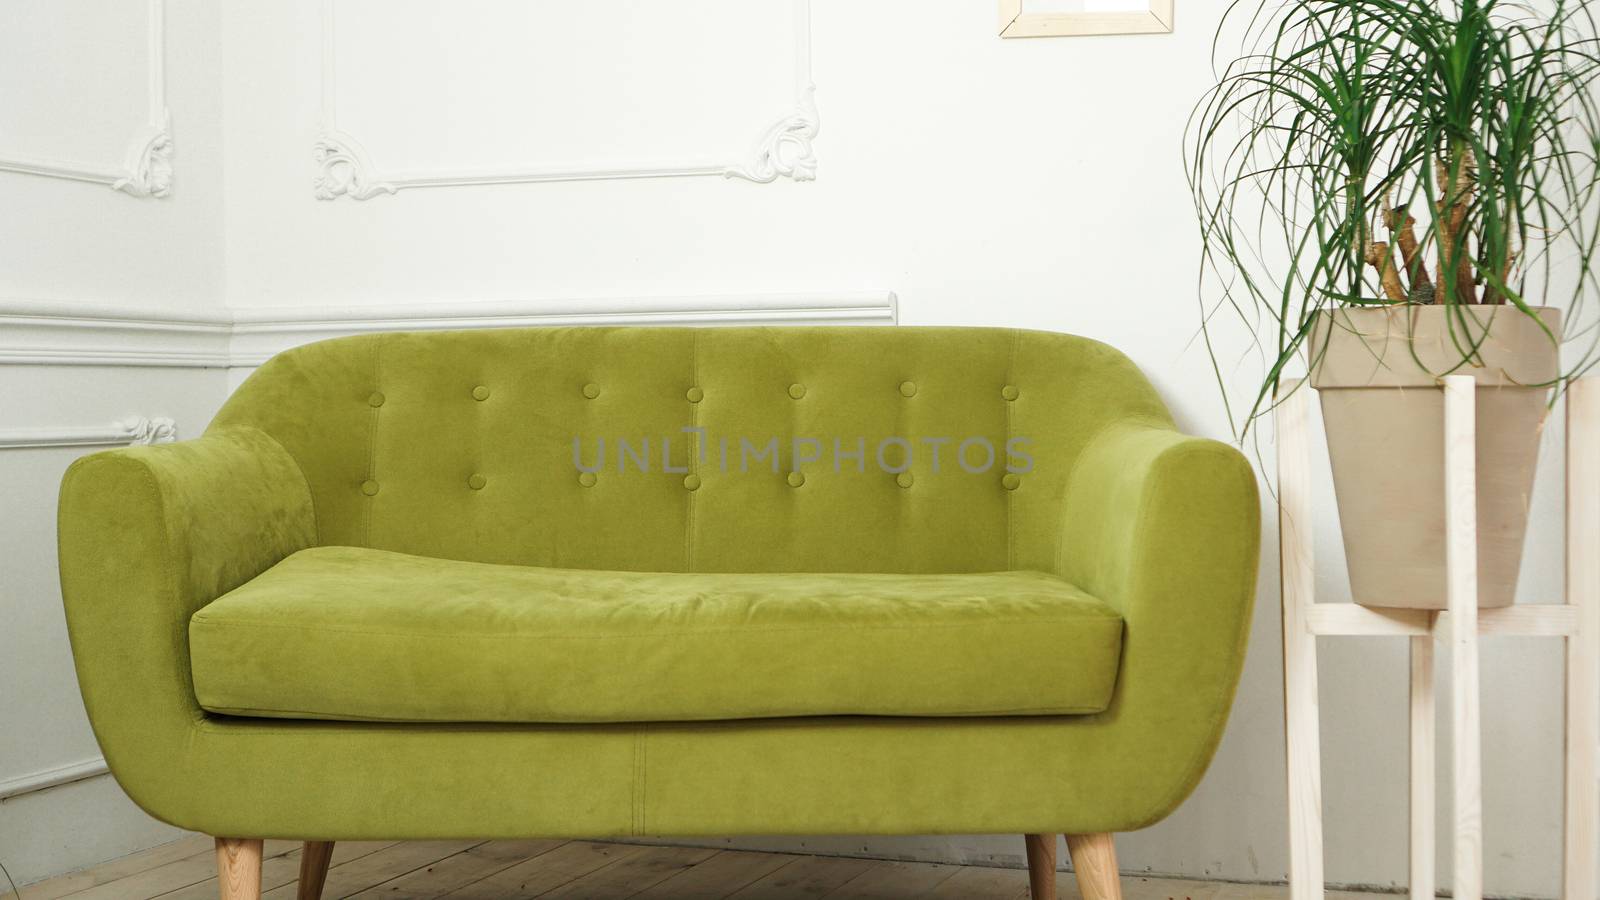 Home interior with new green sofa by natali_brill